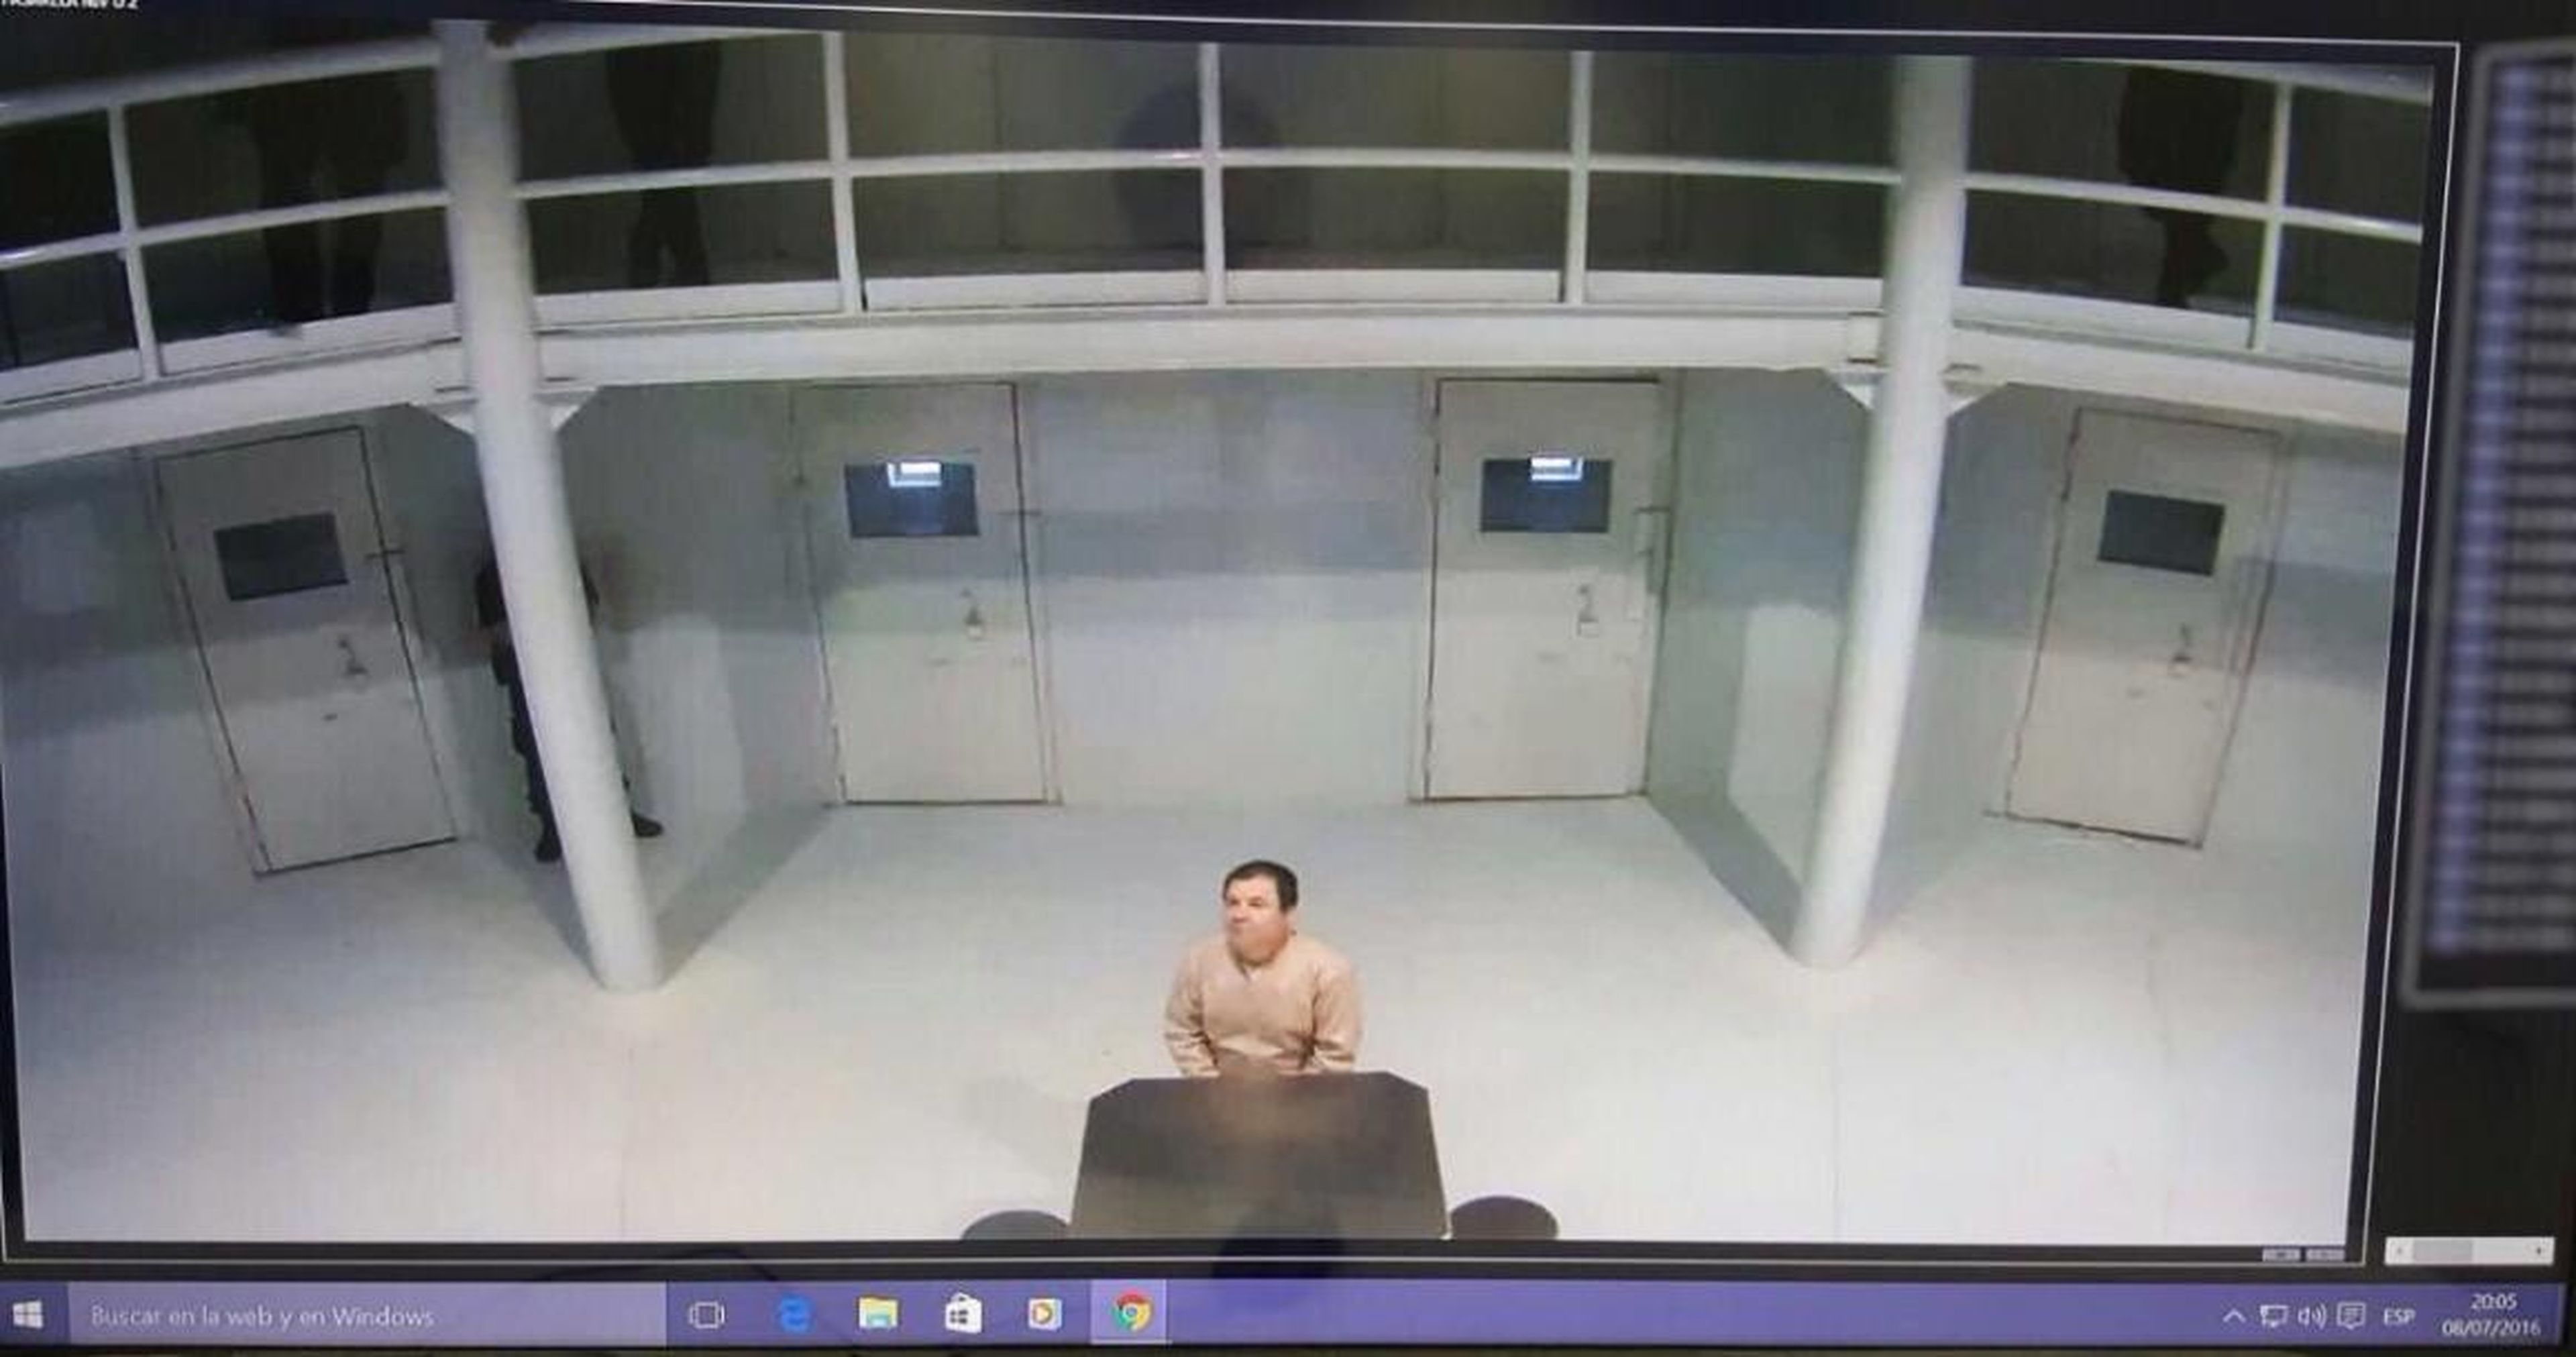 Mexico's interior minister tweeted this image purporting to show "El Chapo" Guzmán in jail.